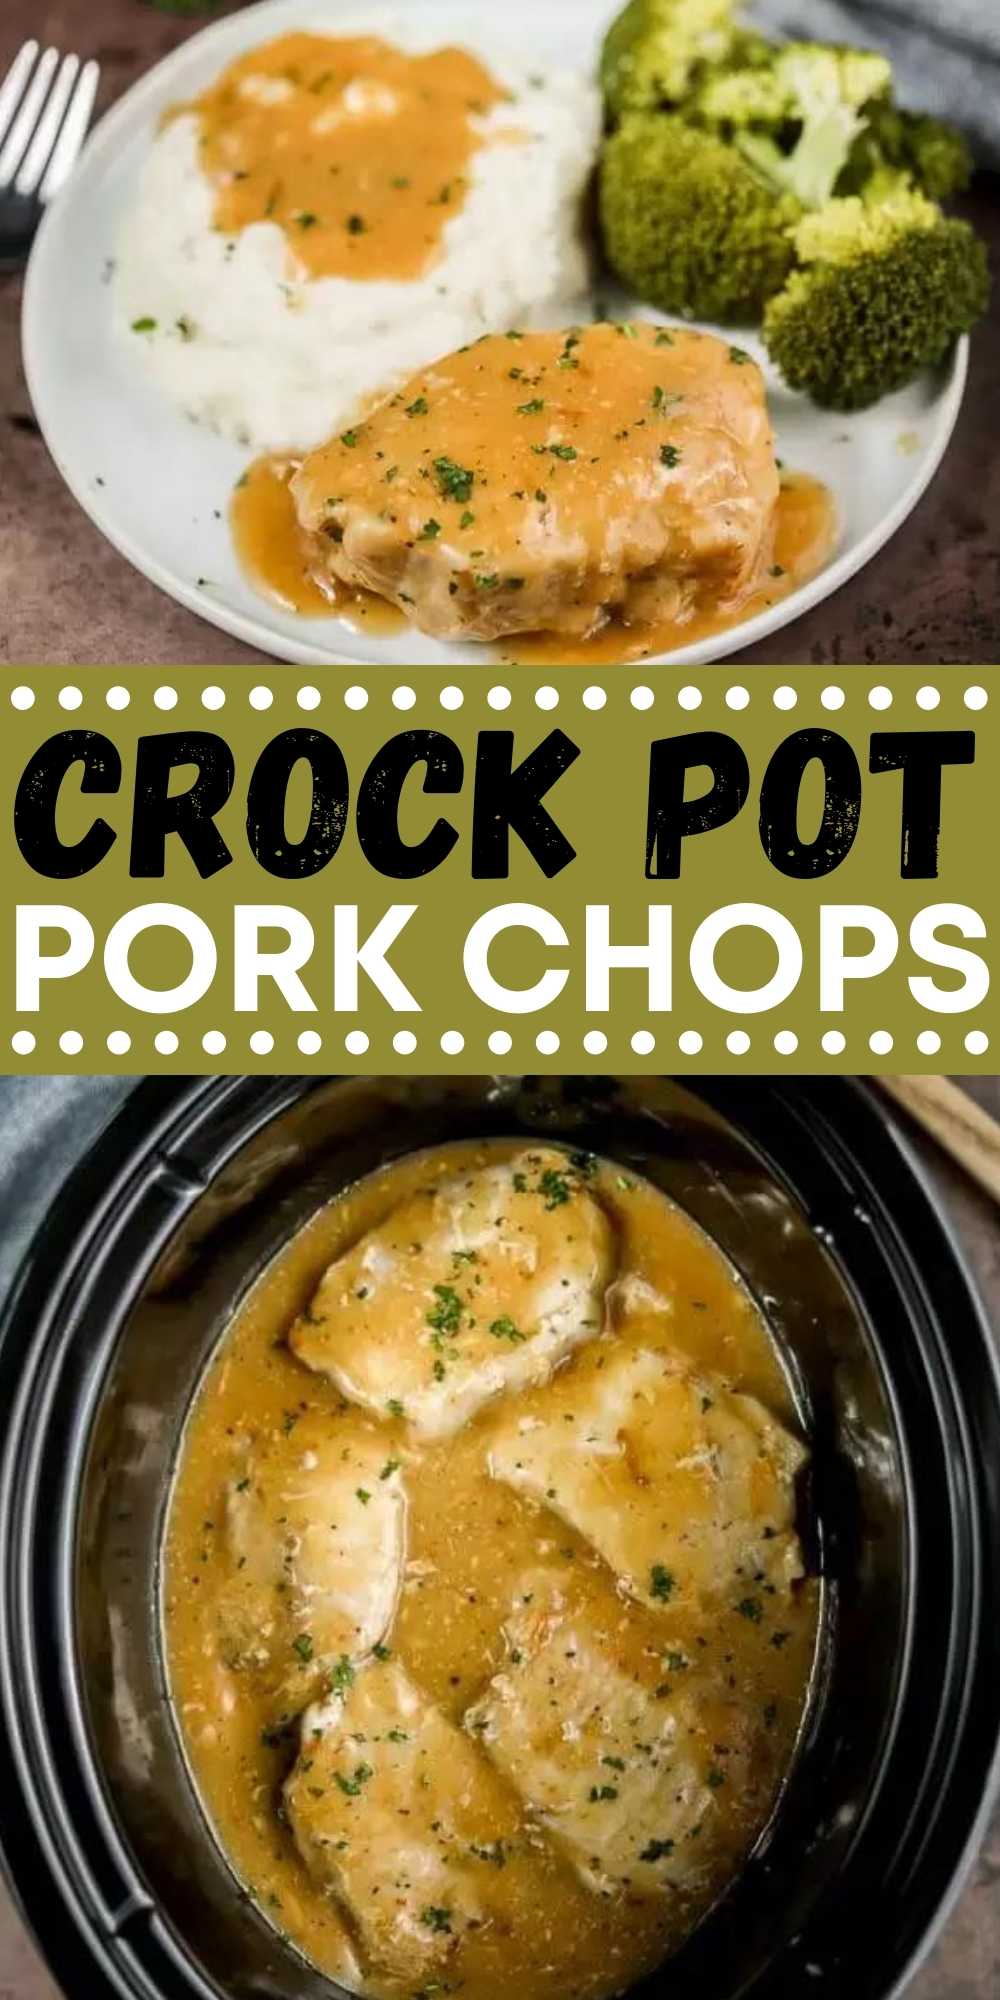 Crock pot pork chops and gravy recipe is a frugal and tasty weeknight meal. The pork is so tender and really easy to make. The sauce is amazing. The entire family will love this slow cooker pork chops with gravy recipe. #eatingonadime #crockpotrecipes #slowcookerrecipes #porkrecipes 
